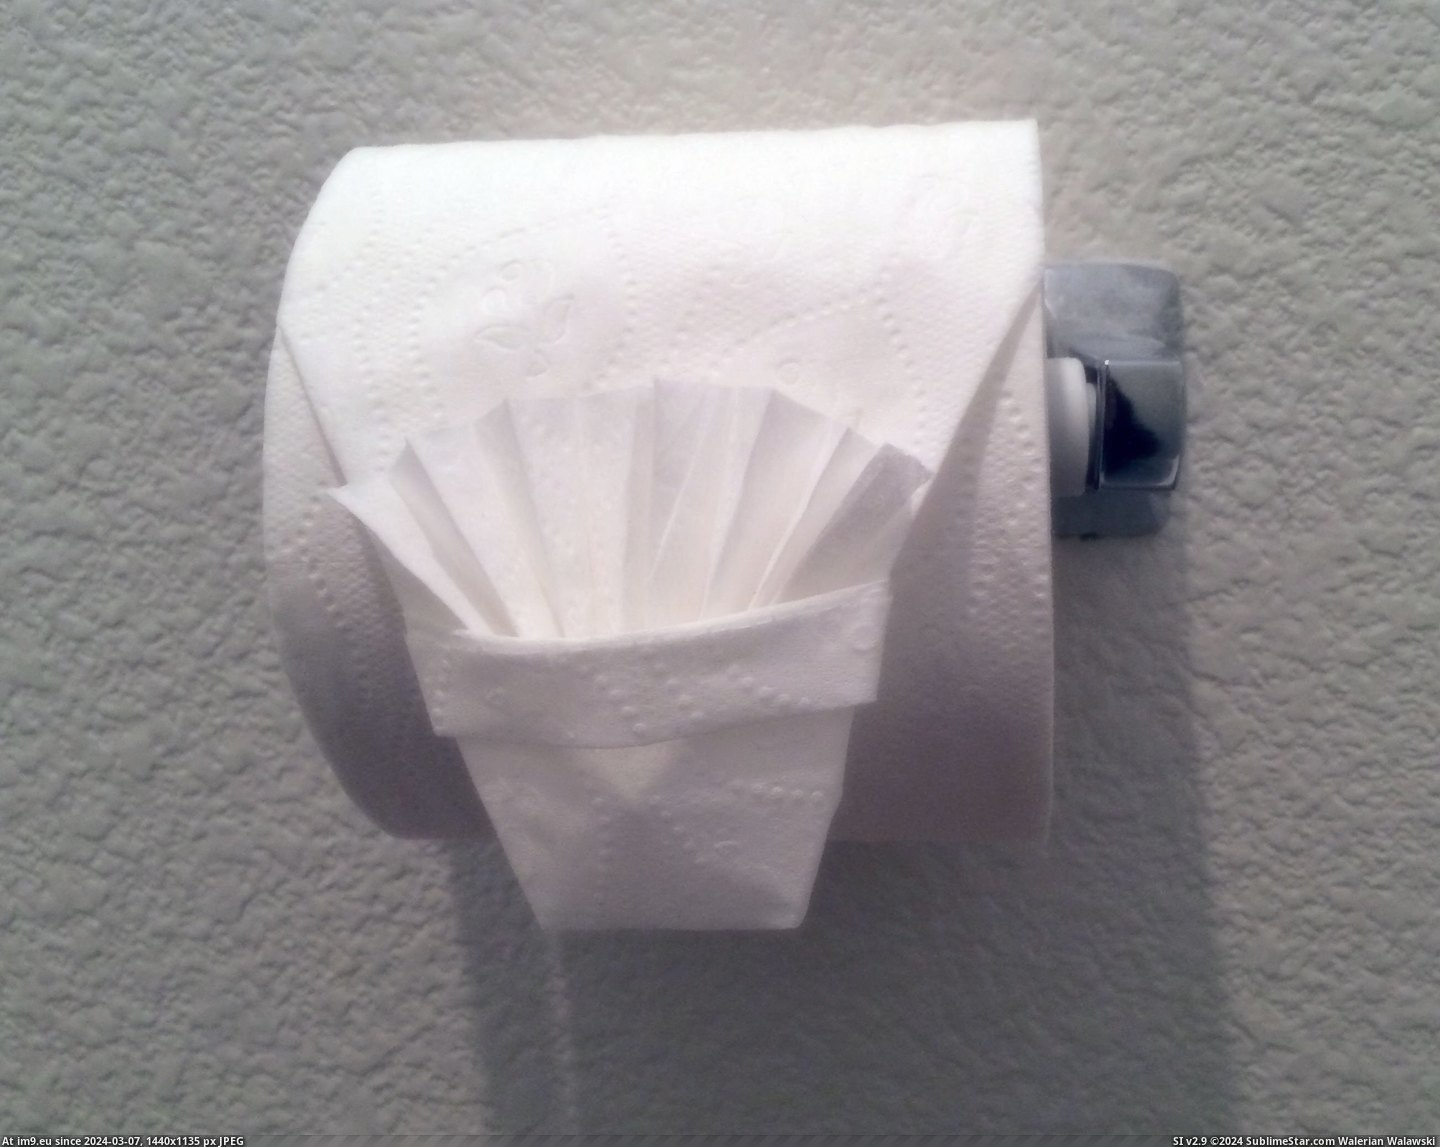 #Funny #Big #Fancy #Kidding #Parties #Origami #Ing #Houses #Guests [Funny] Whenever I go to parties at big fancy houses, I origami the TP so other guests are like 'Are you f-ing kidding me?' Pic. (Image of album My r/FUNNY favs))